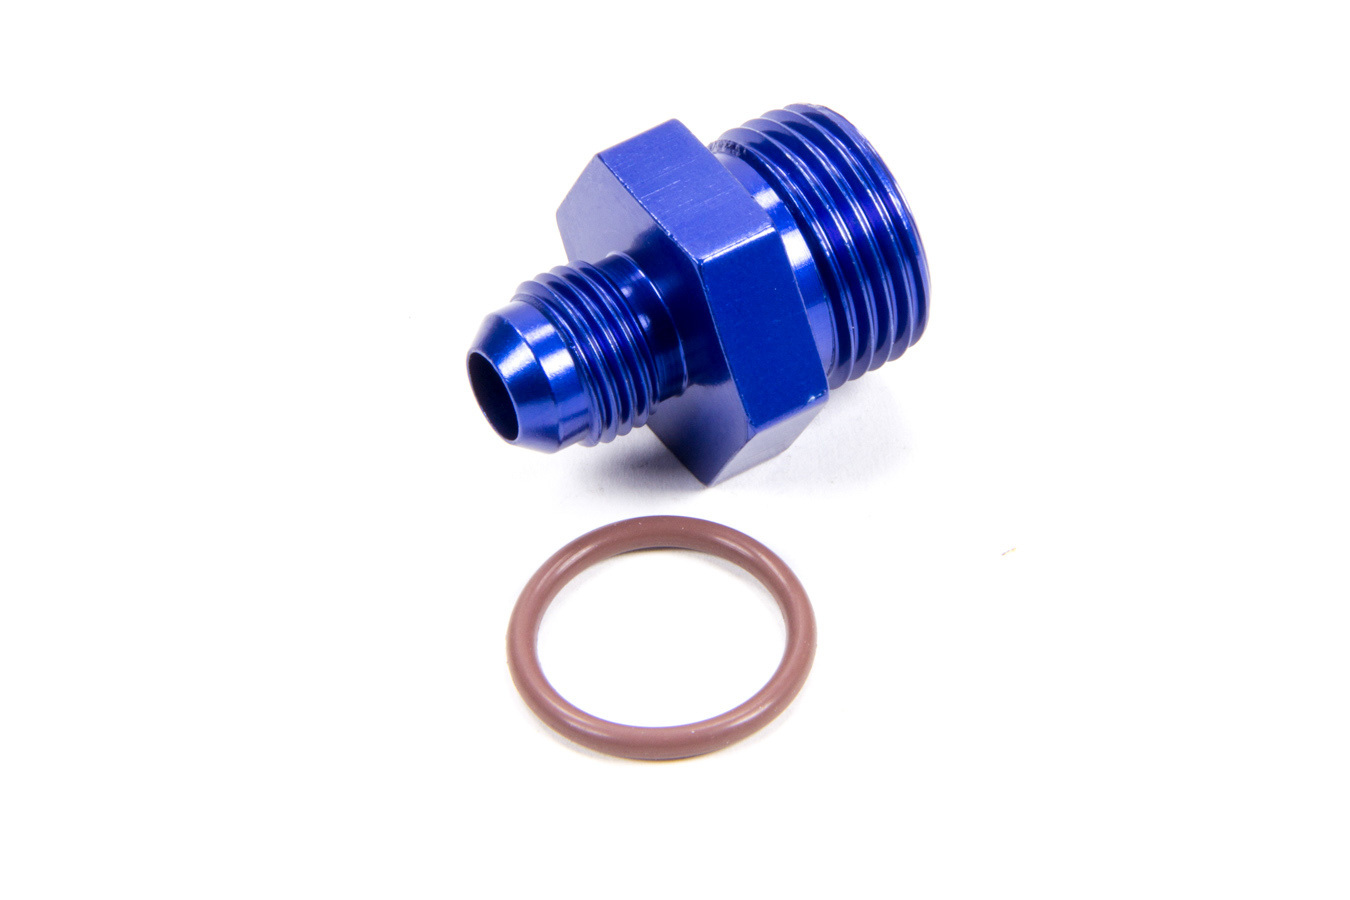 Fragola 495113 Fitting, Adapter, Straight, 6 AN Male to 10 AN Male O-Ring, Aluminum, Blue Anodized, Each